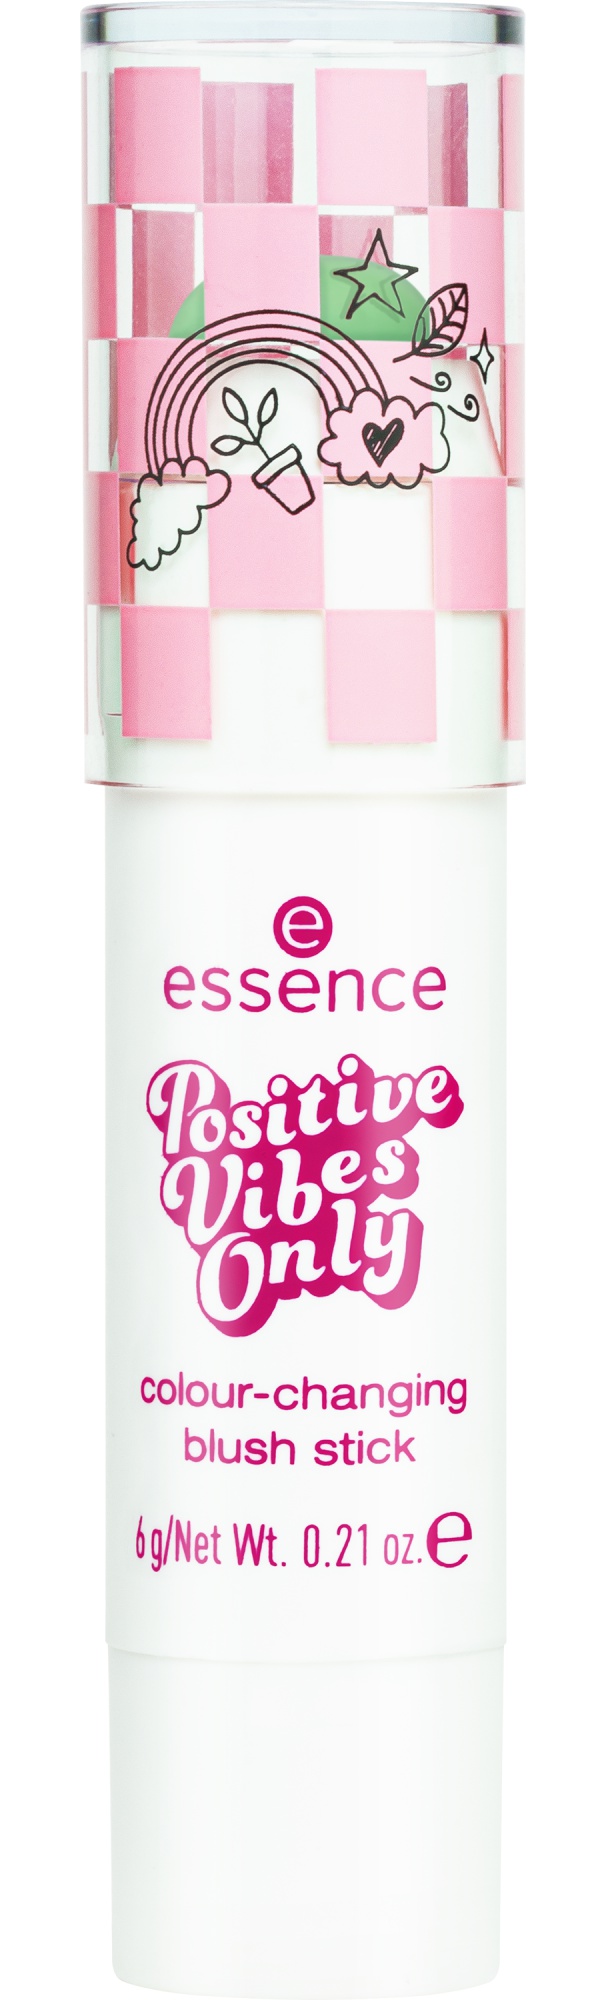 Essence Positive Vibes Only Colour-changing Blush Stick